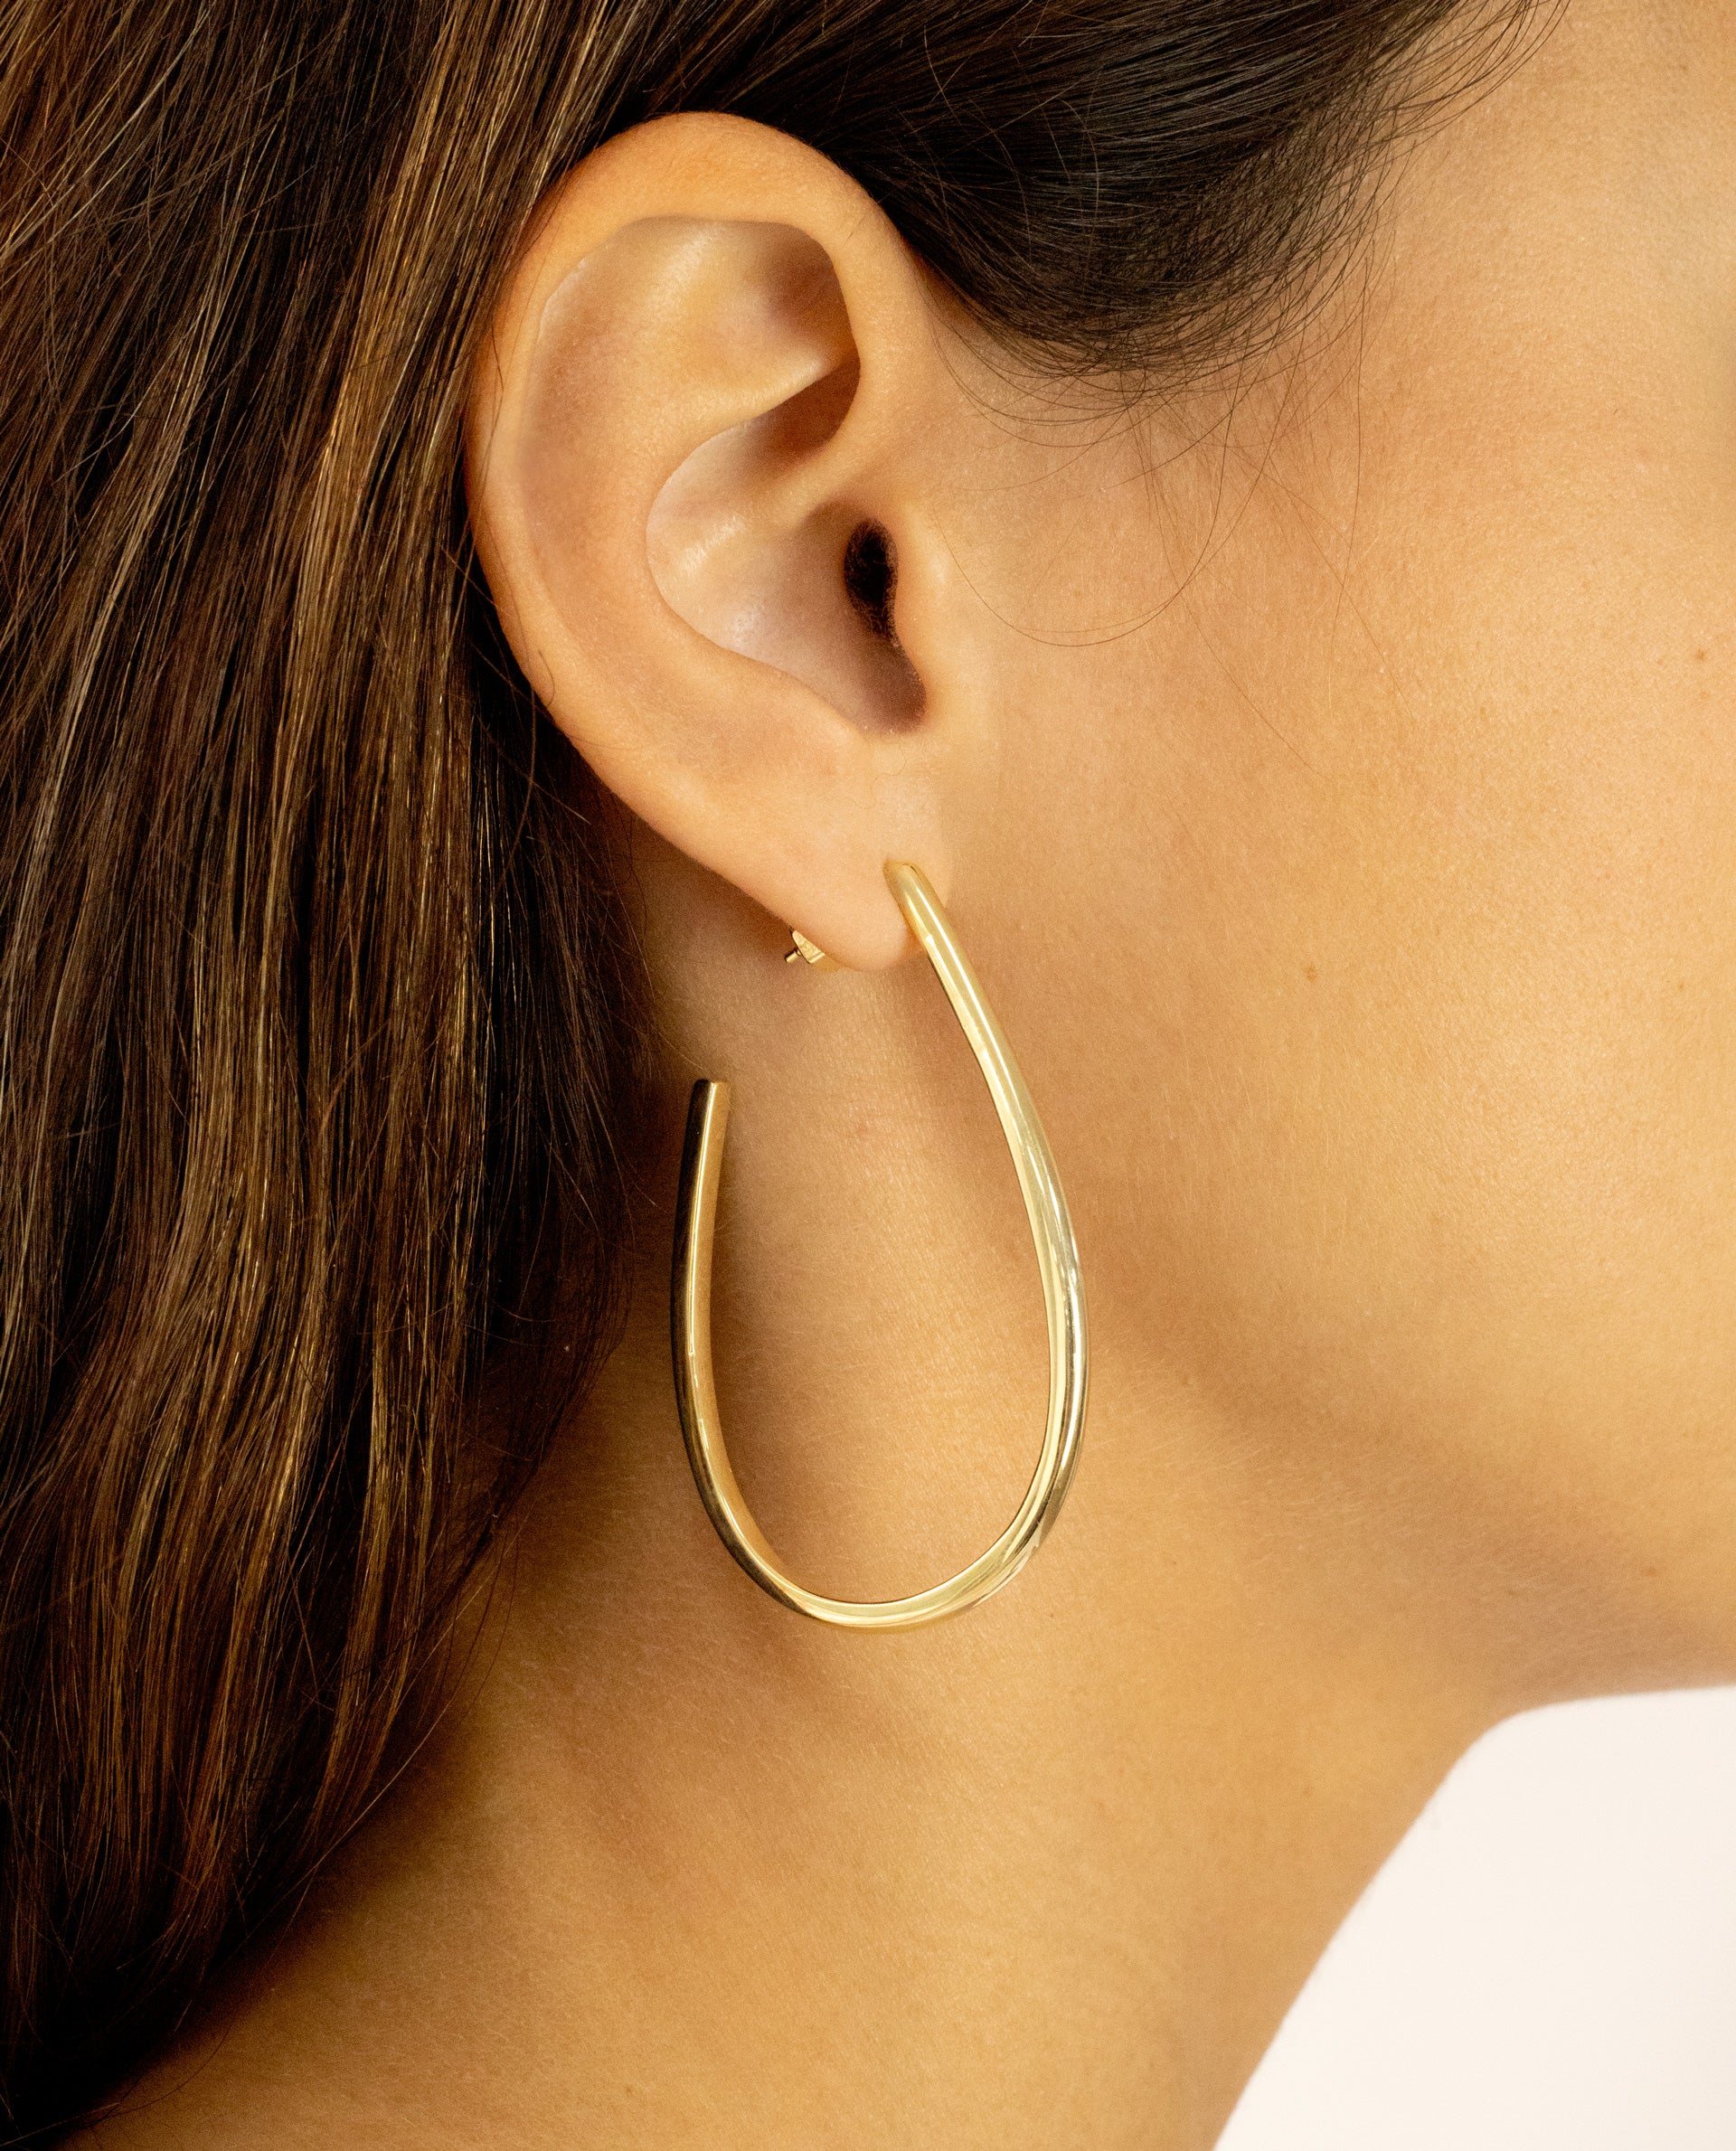 DROP EARRINGS - GOLD PLATED